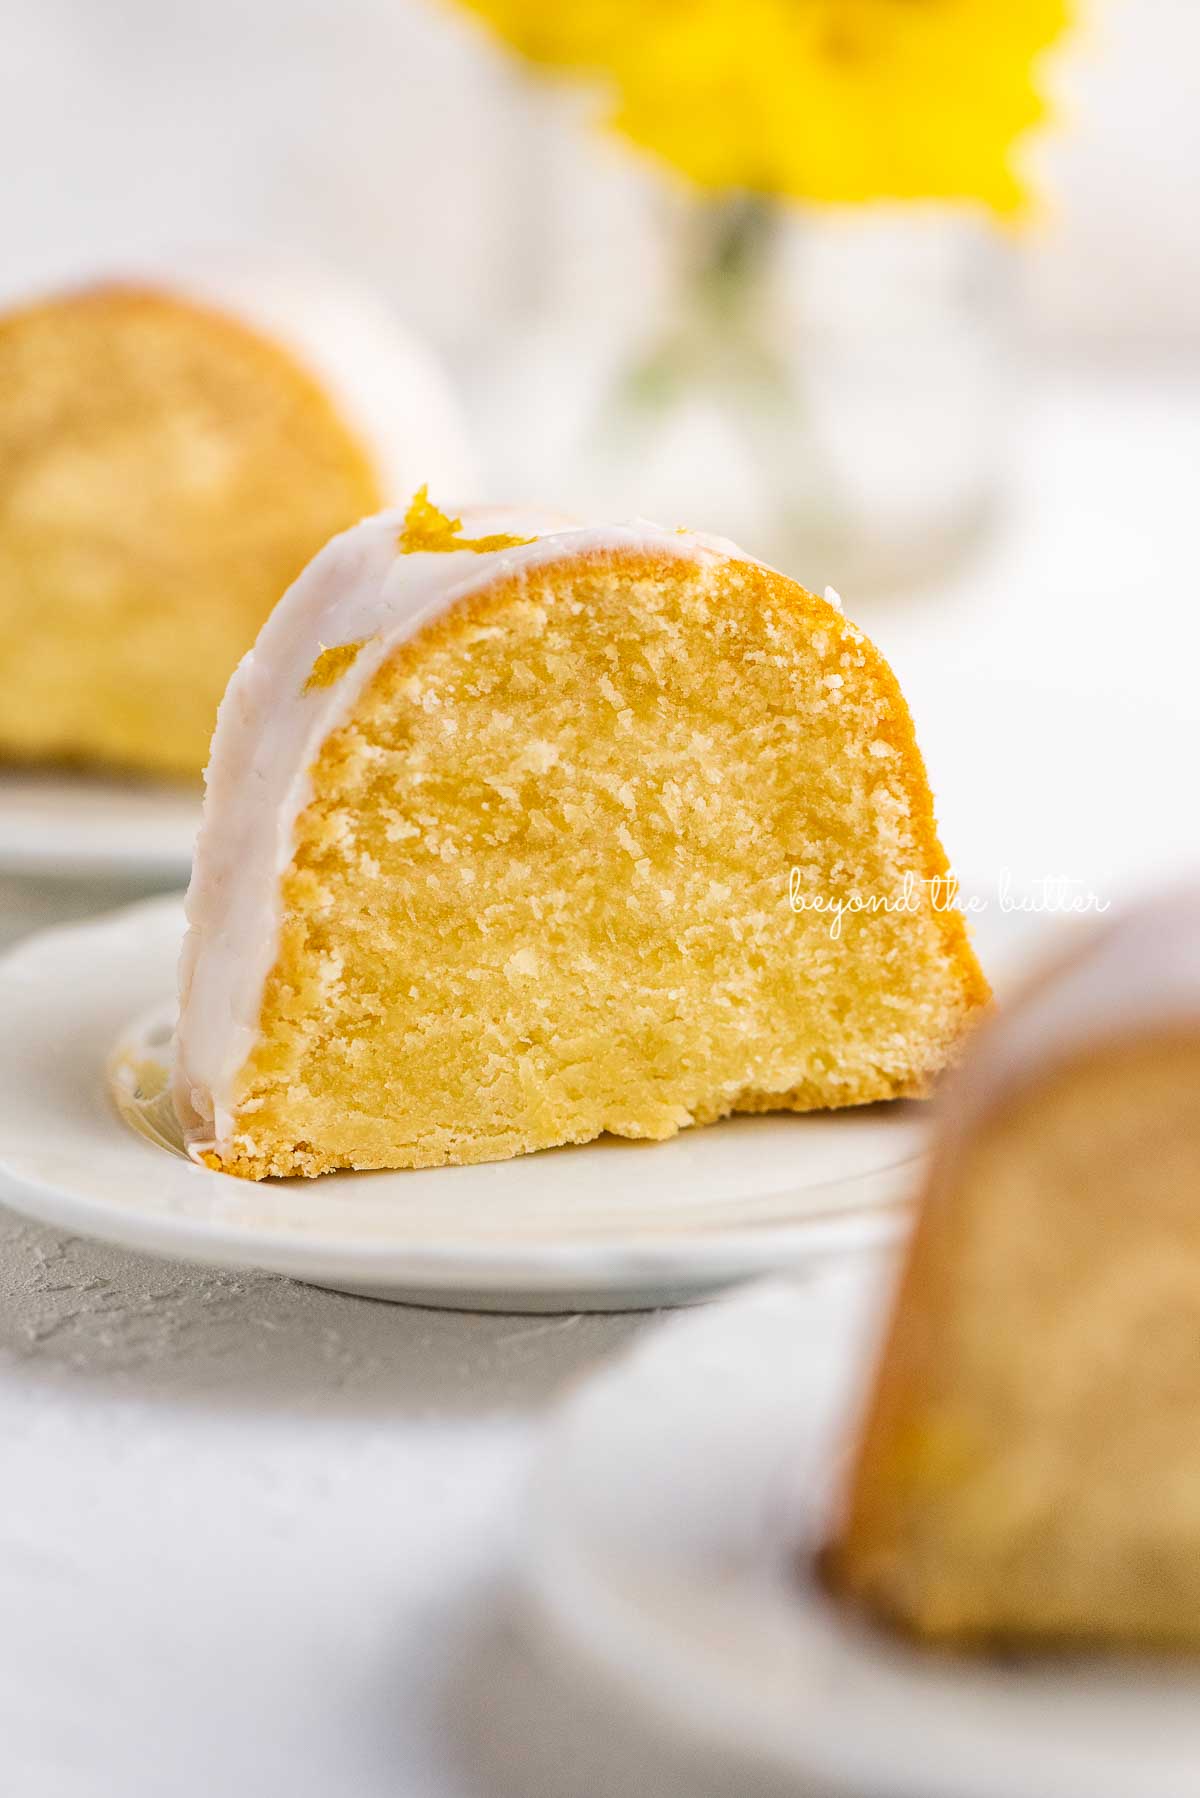 Small lemon cream cheese pound cake slice on a small dessert plate on white background.